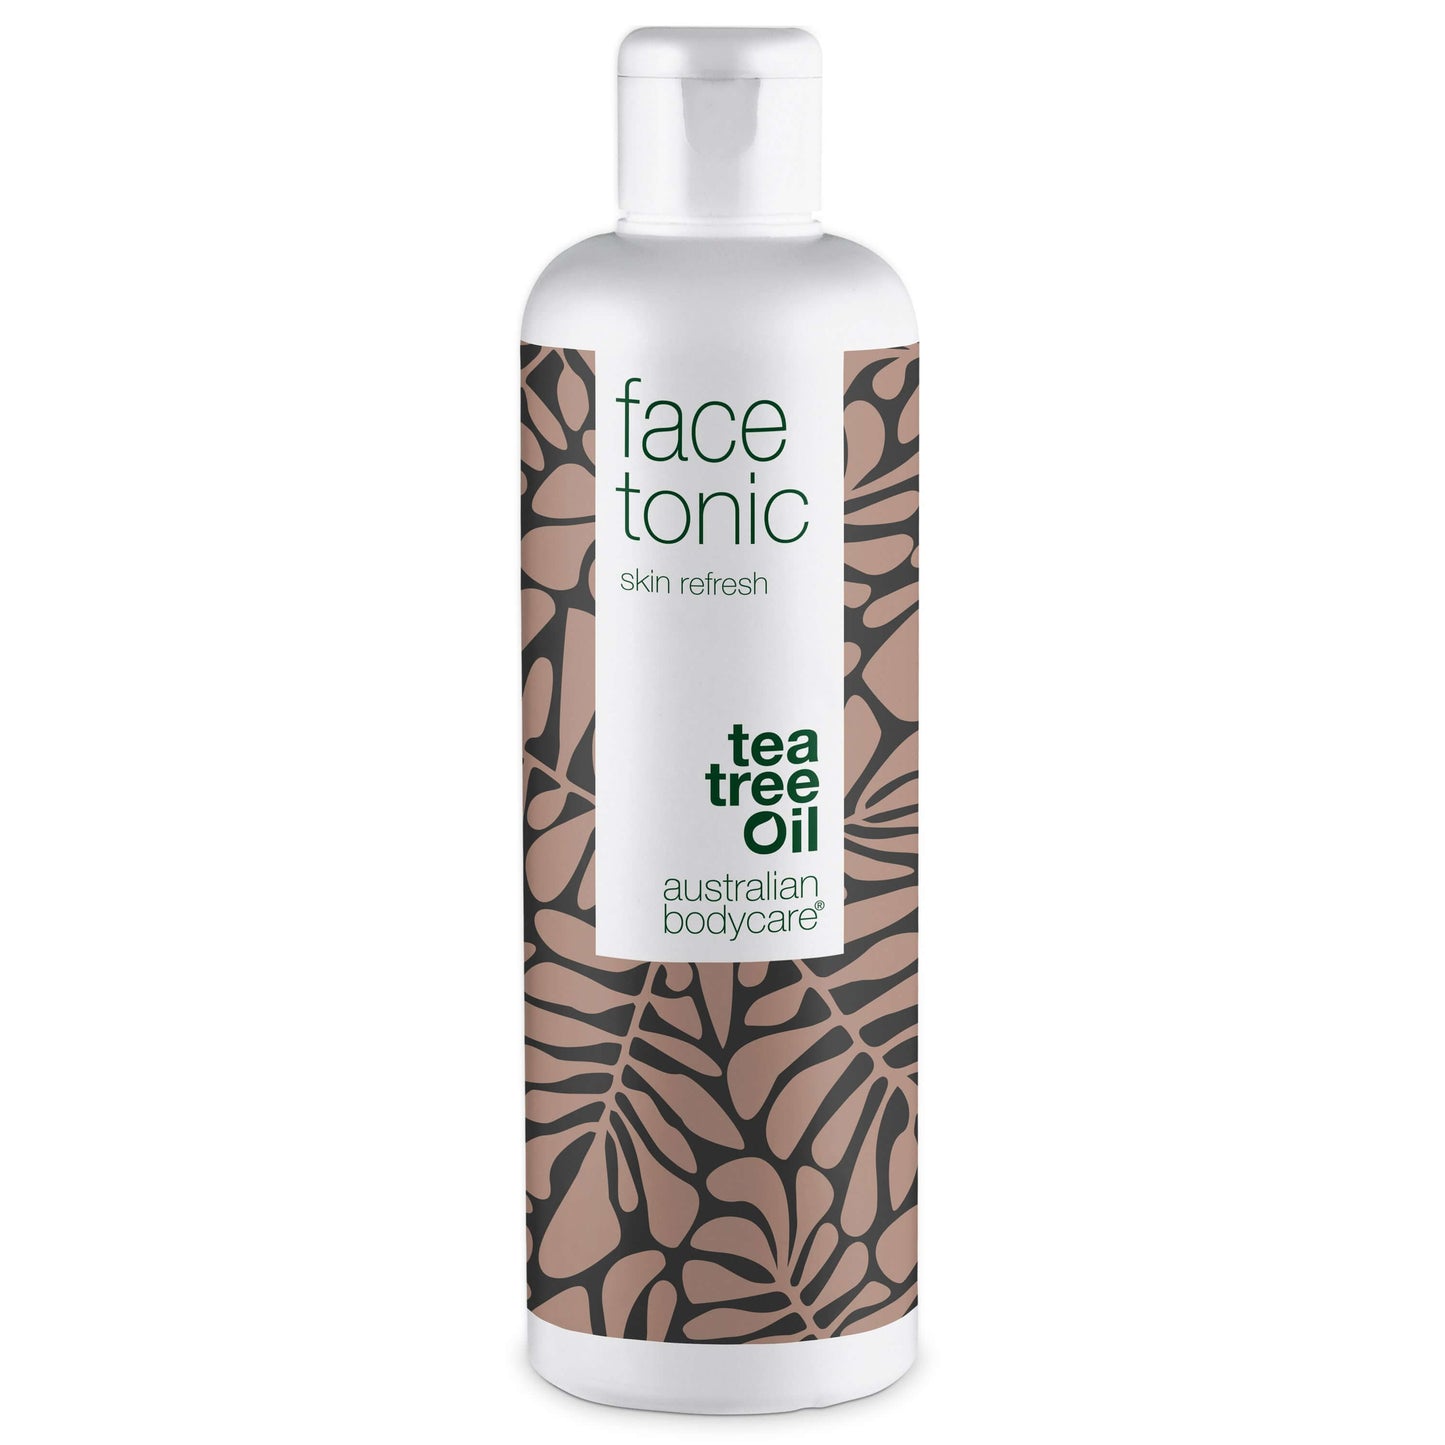 Facial toner for daily deep cleansing - Face toner with Tea Tree Oil for pimples, blackheads and oily skin